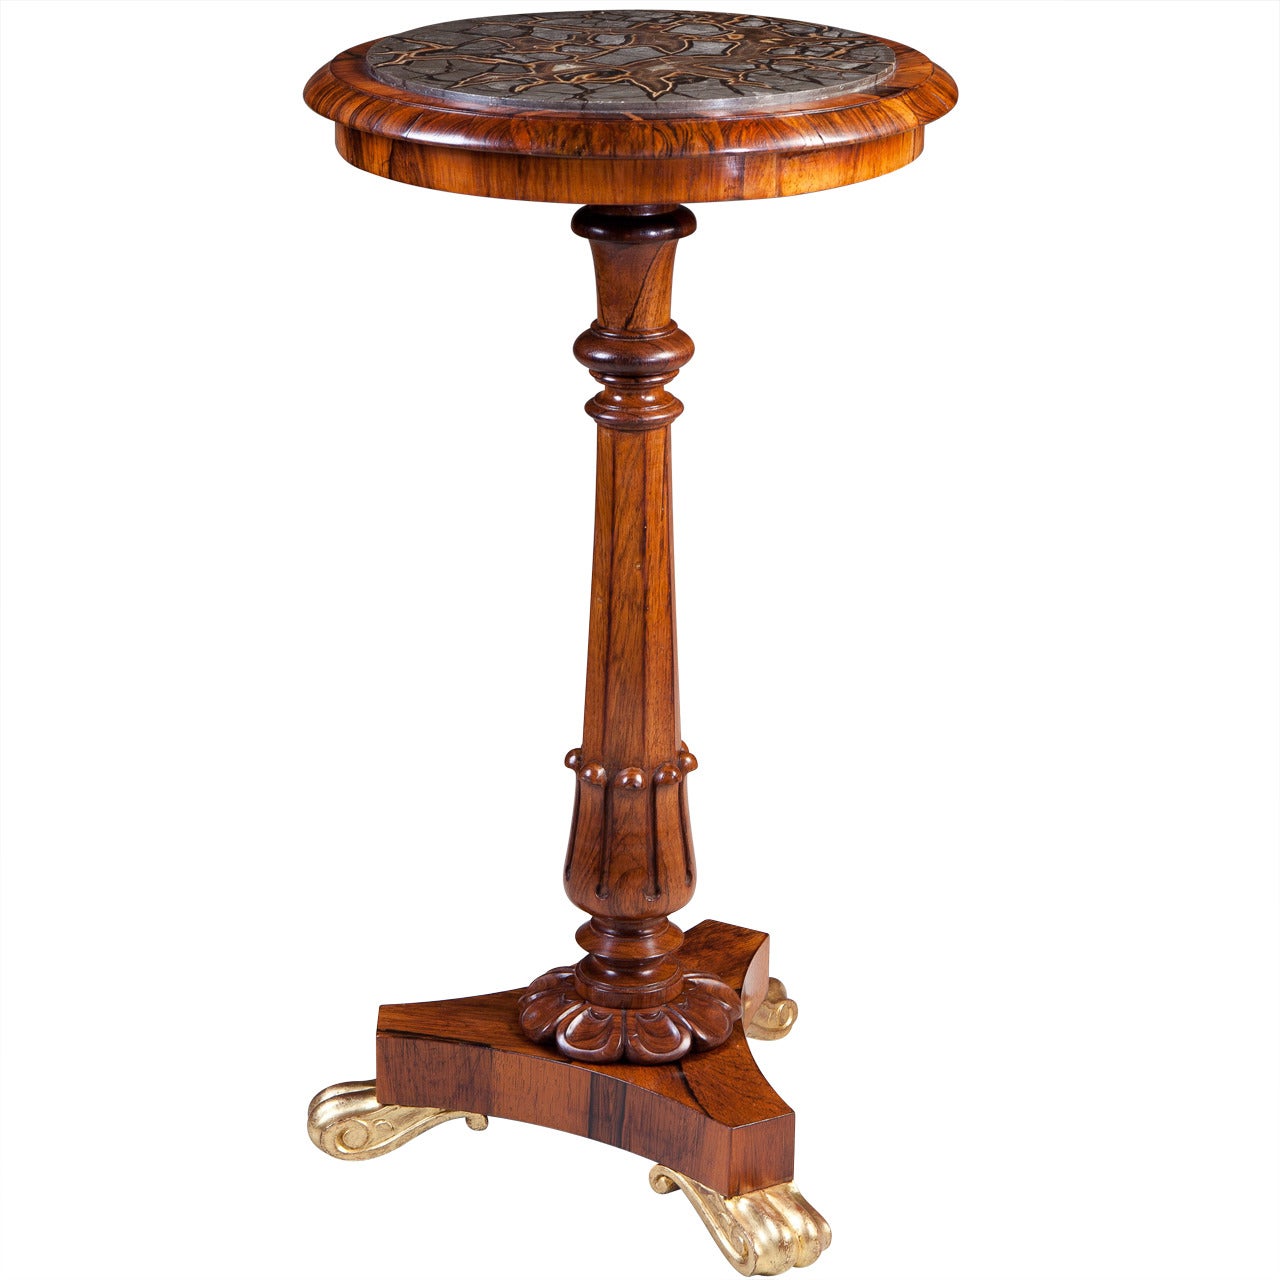 Rare & Important Rosewood Campaign Turtlestone Occassional Table